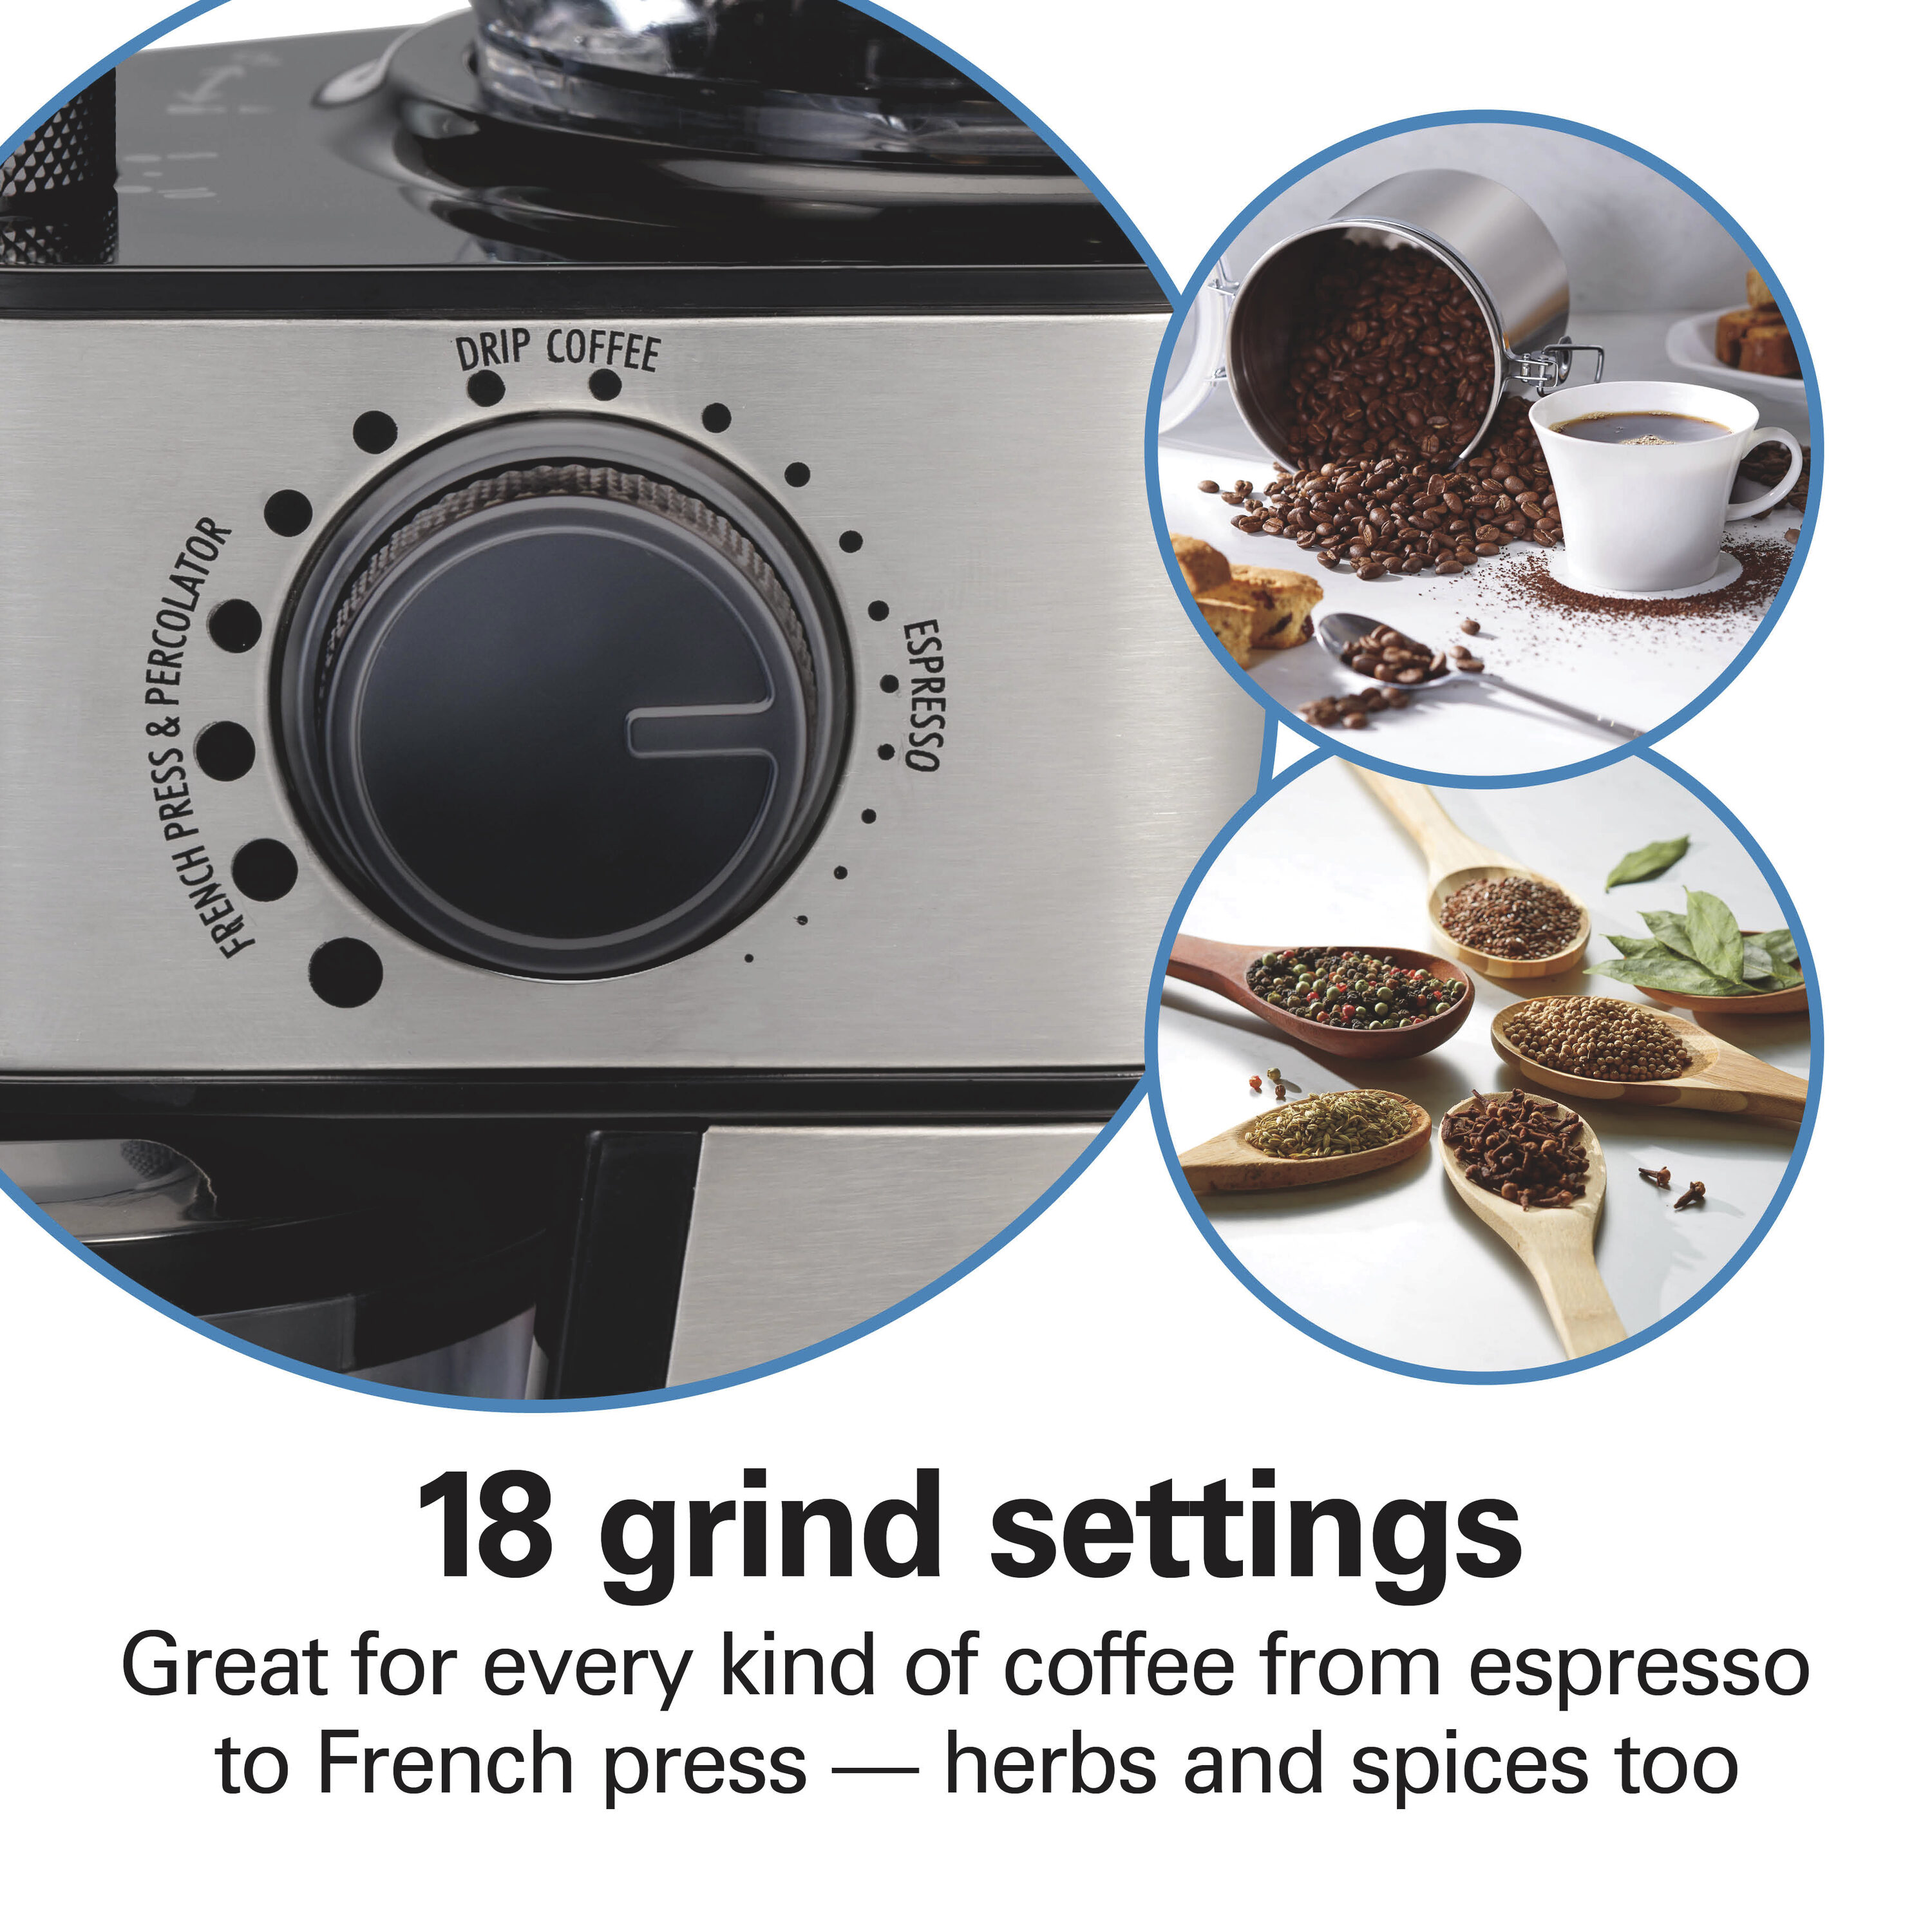  Hamilton Beach Fresh Grind Electric Coffee Grinder for Beans,  Spices and More, Stainless Steel Blades, Removable Chamber, Makes up to 12  Cups, White : Home & Kitchen